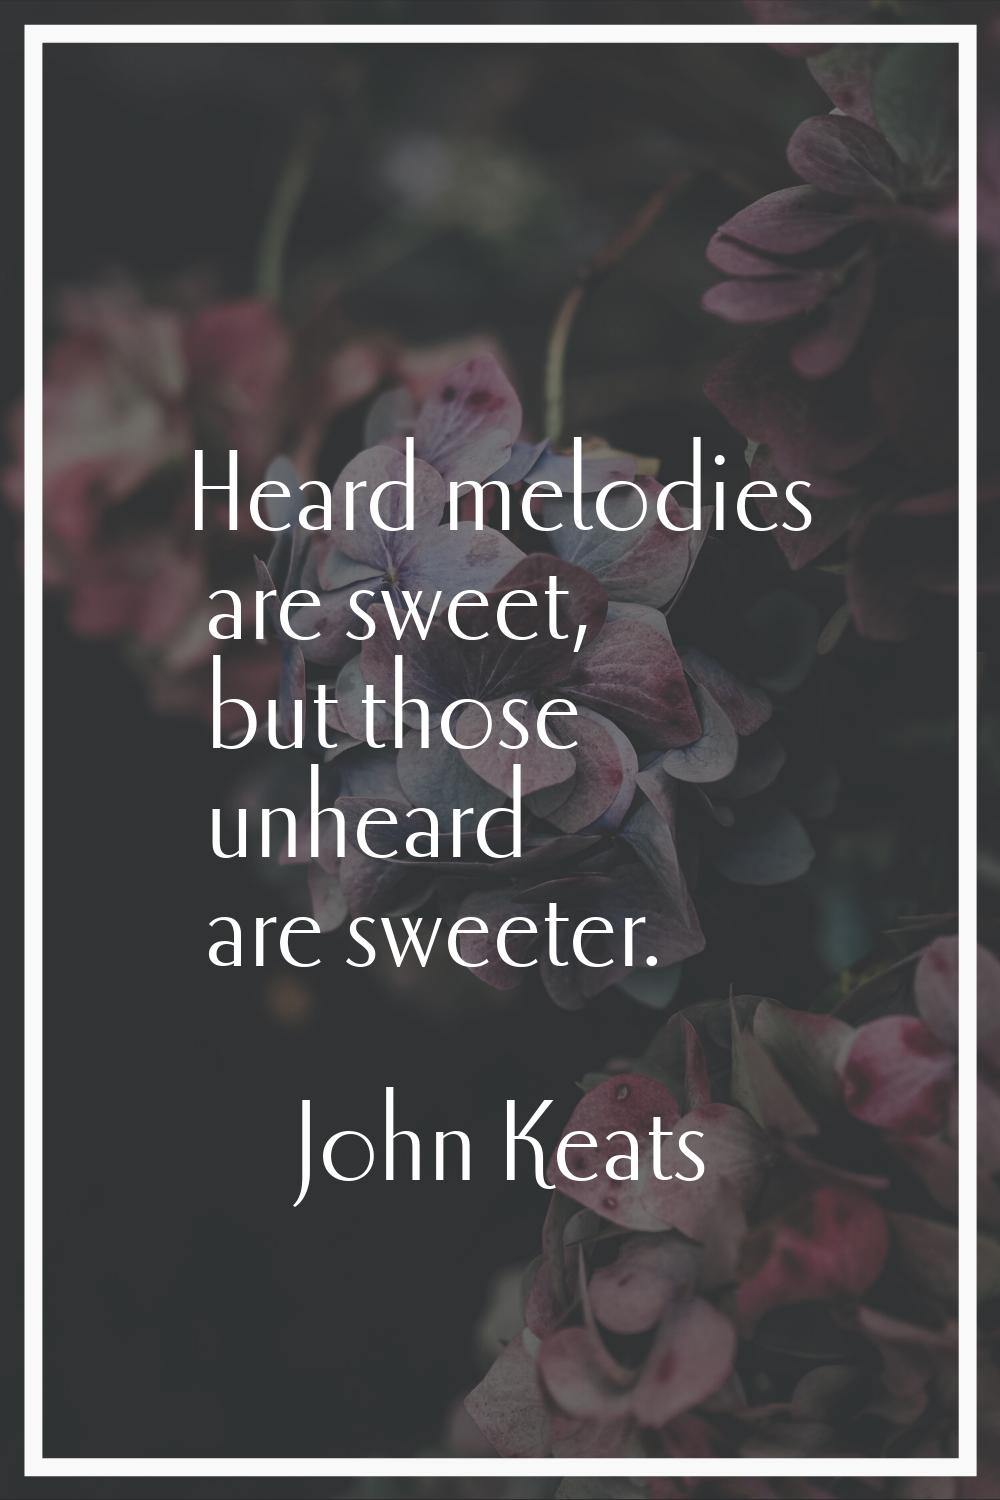 Heard melodies are sweet, but those unheard are sweeter.